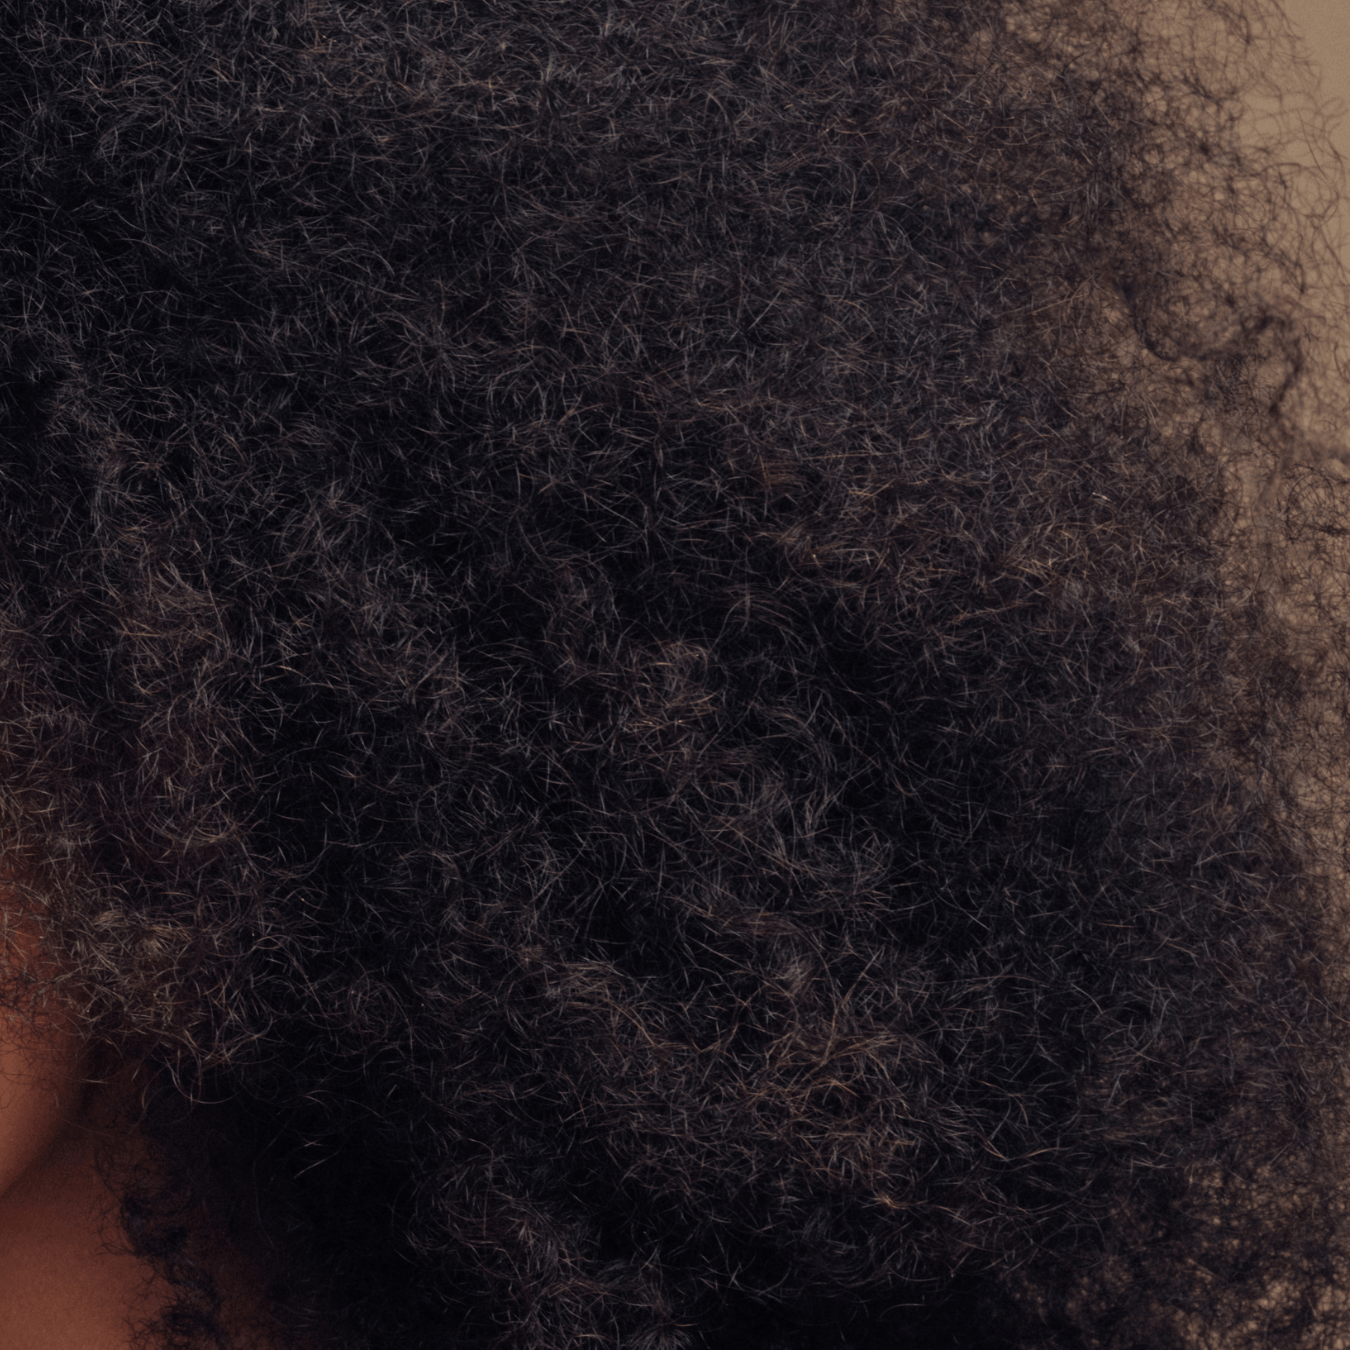 How to care for coily hair, best products for tight curly hair natural